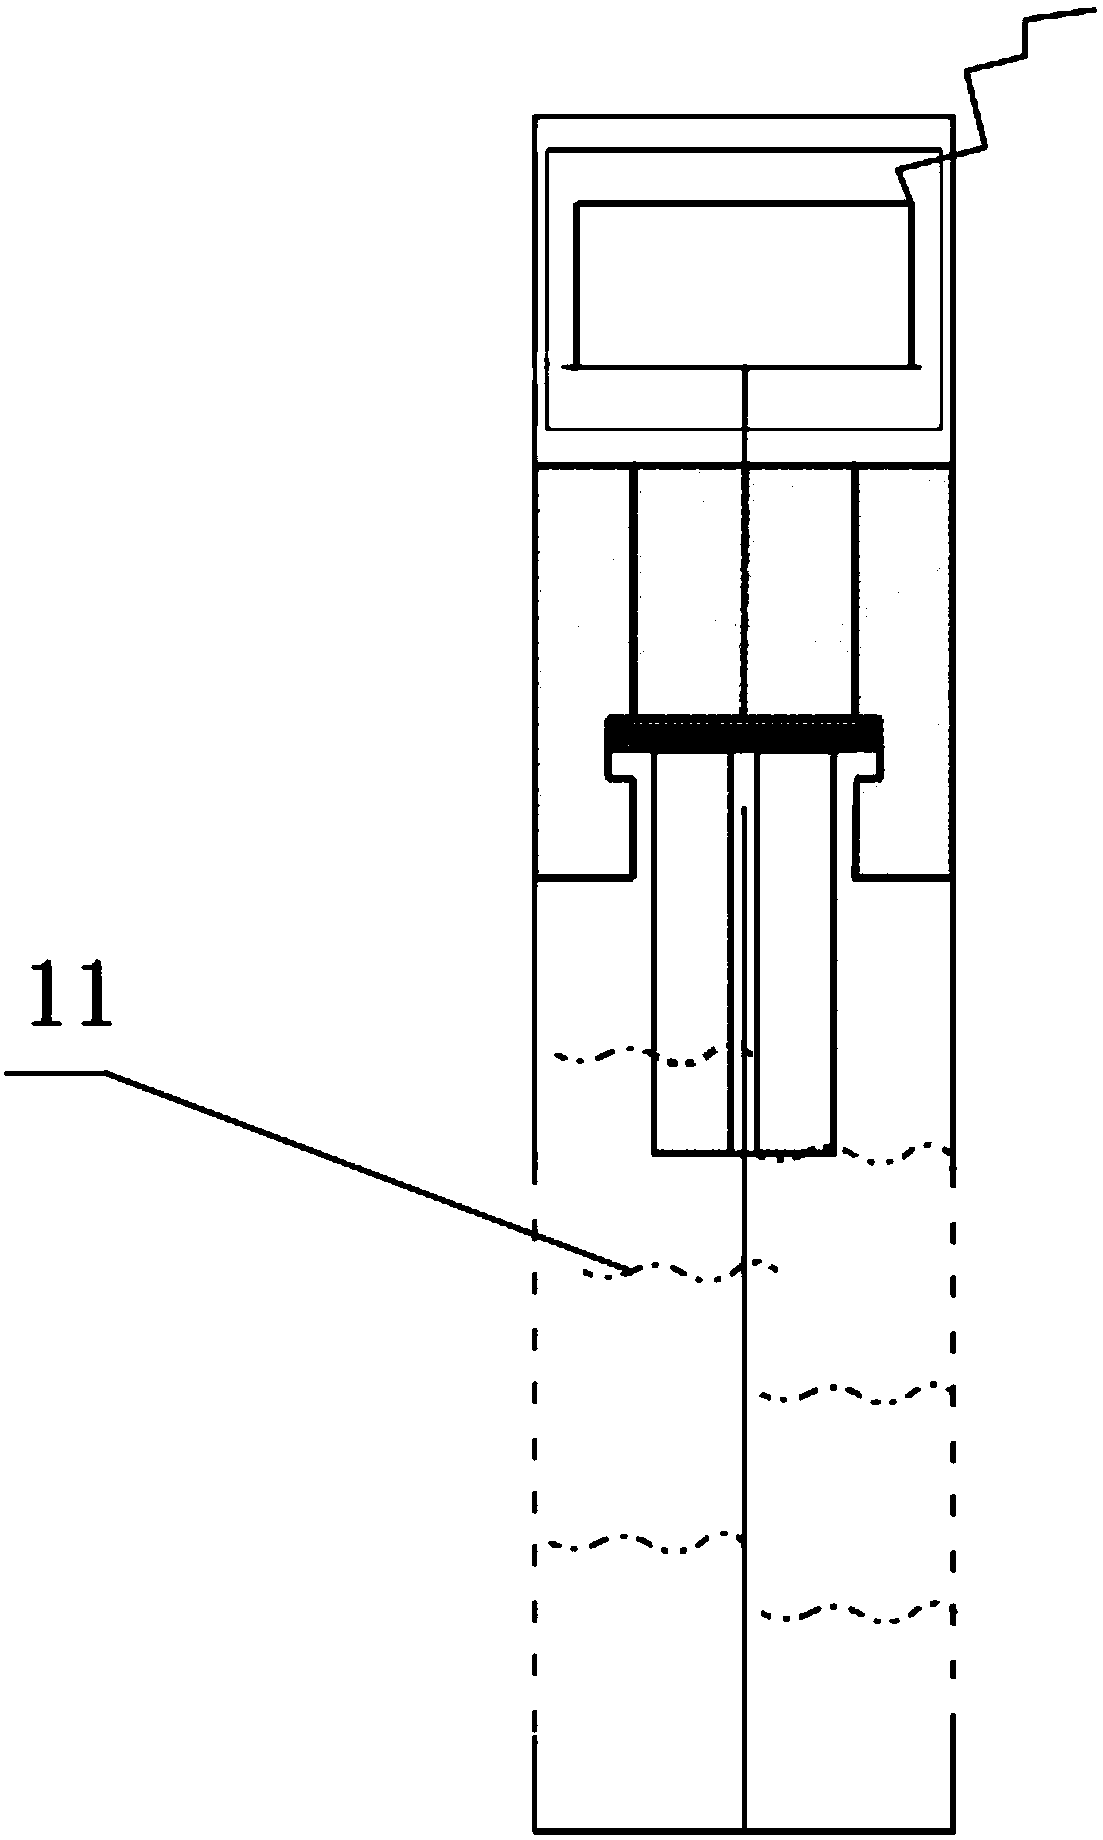 Orientated detection device for density of solution